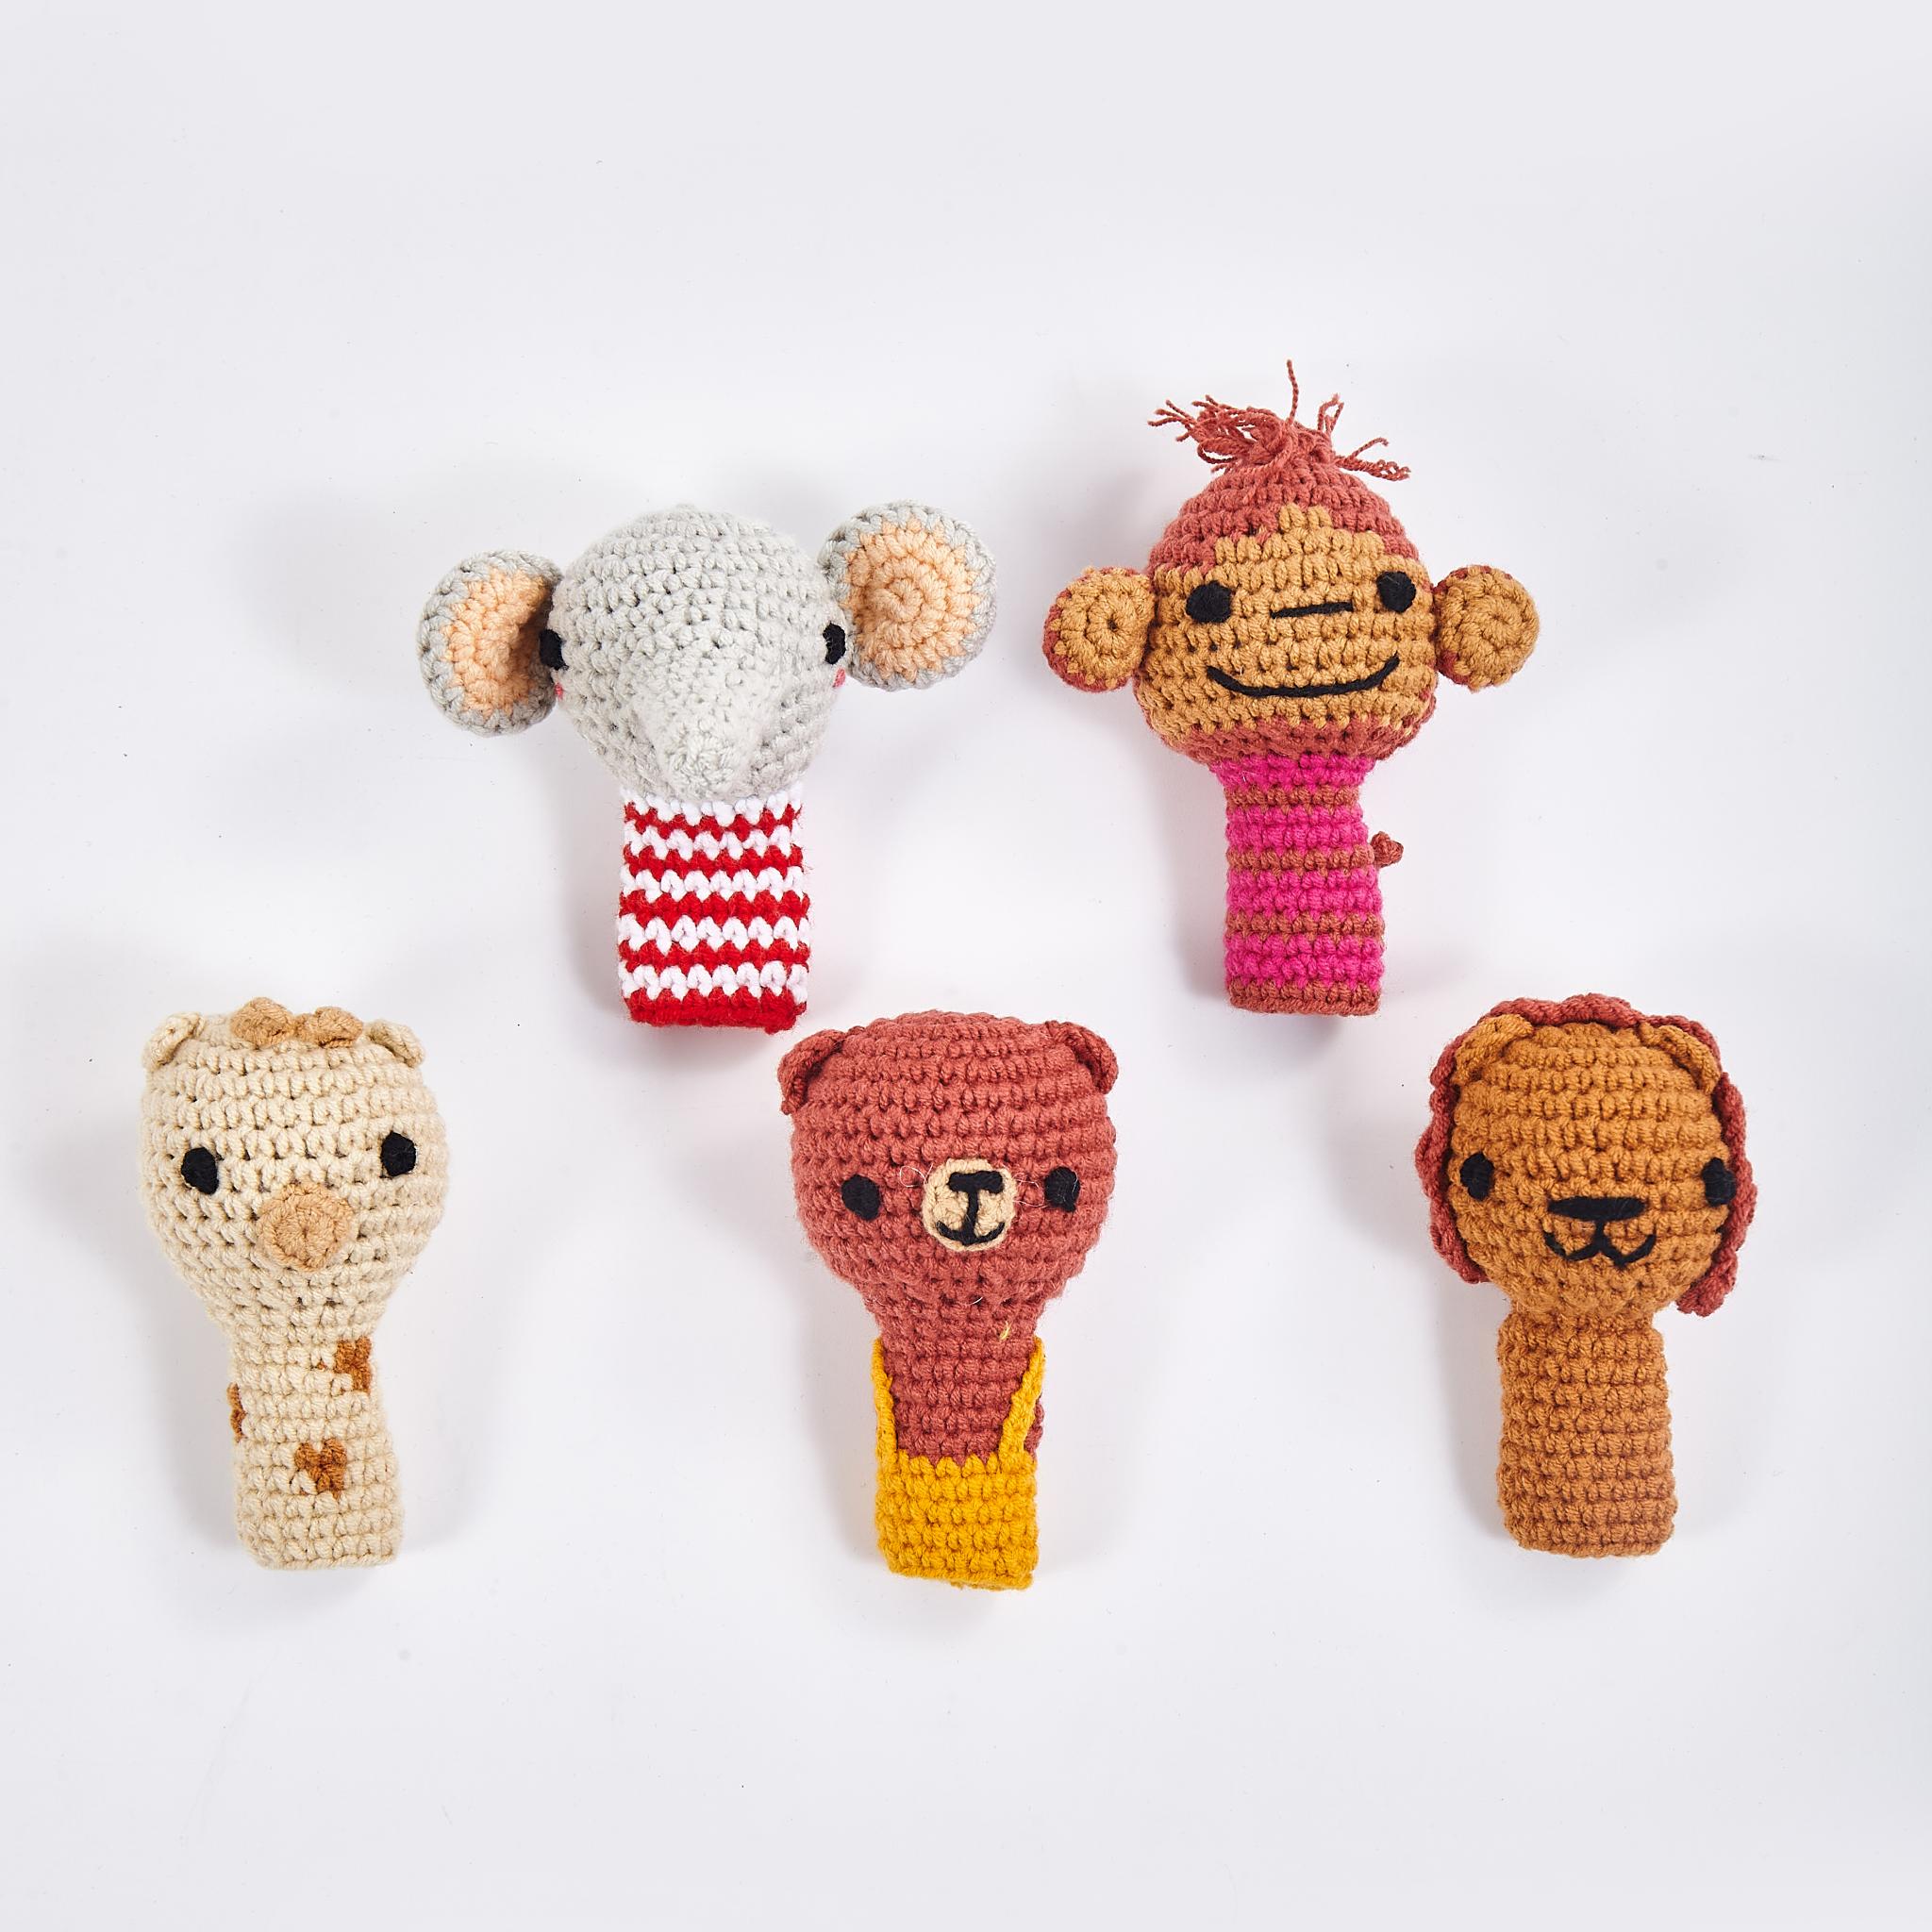 Crochet finger puppets made from organic cotton